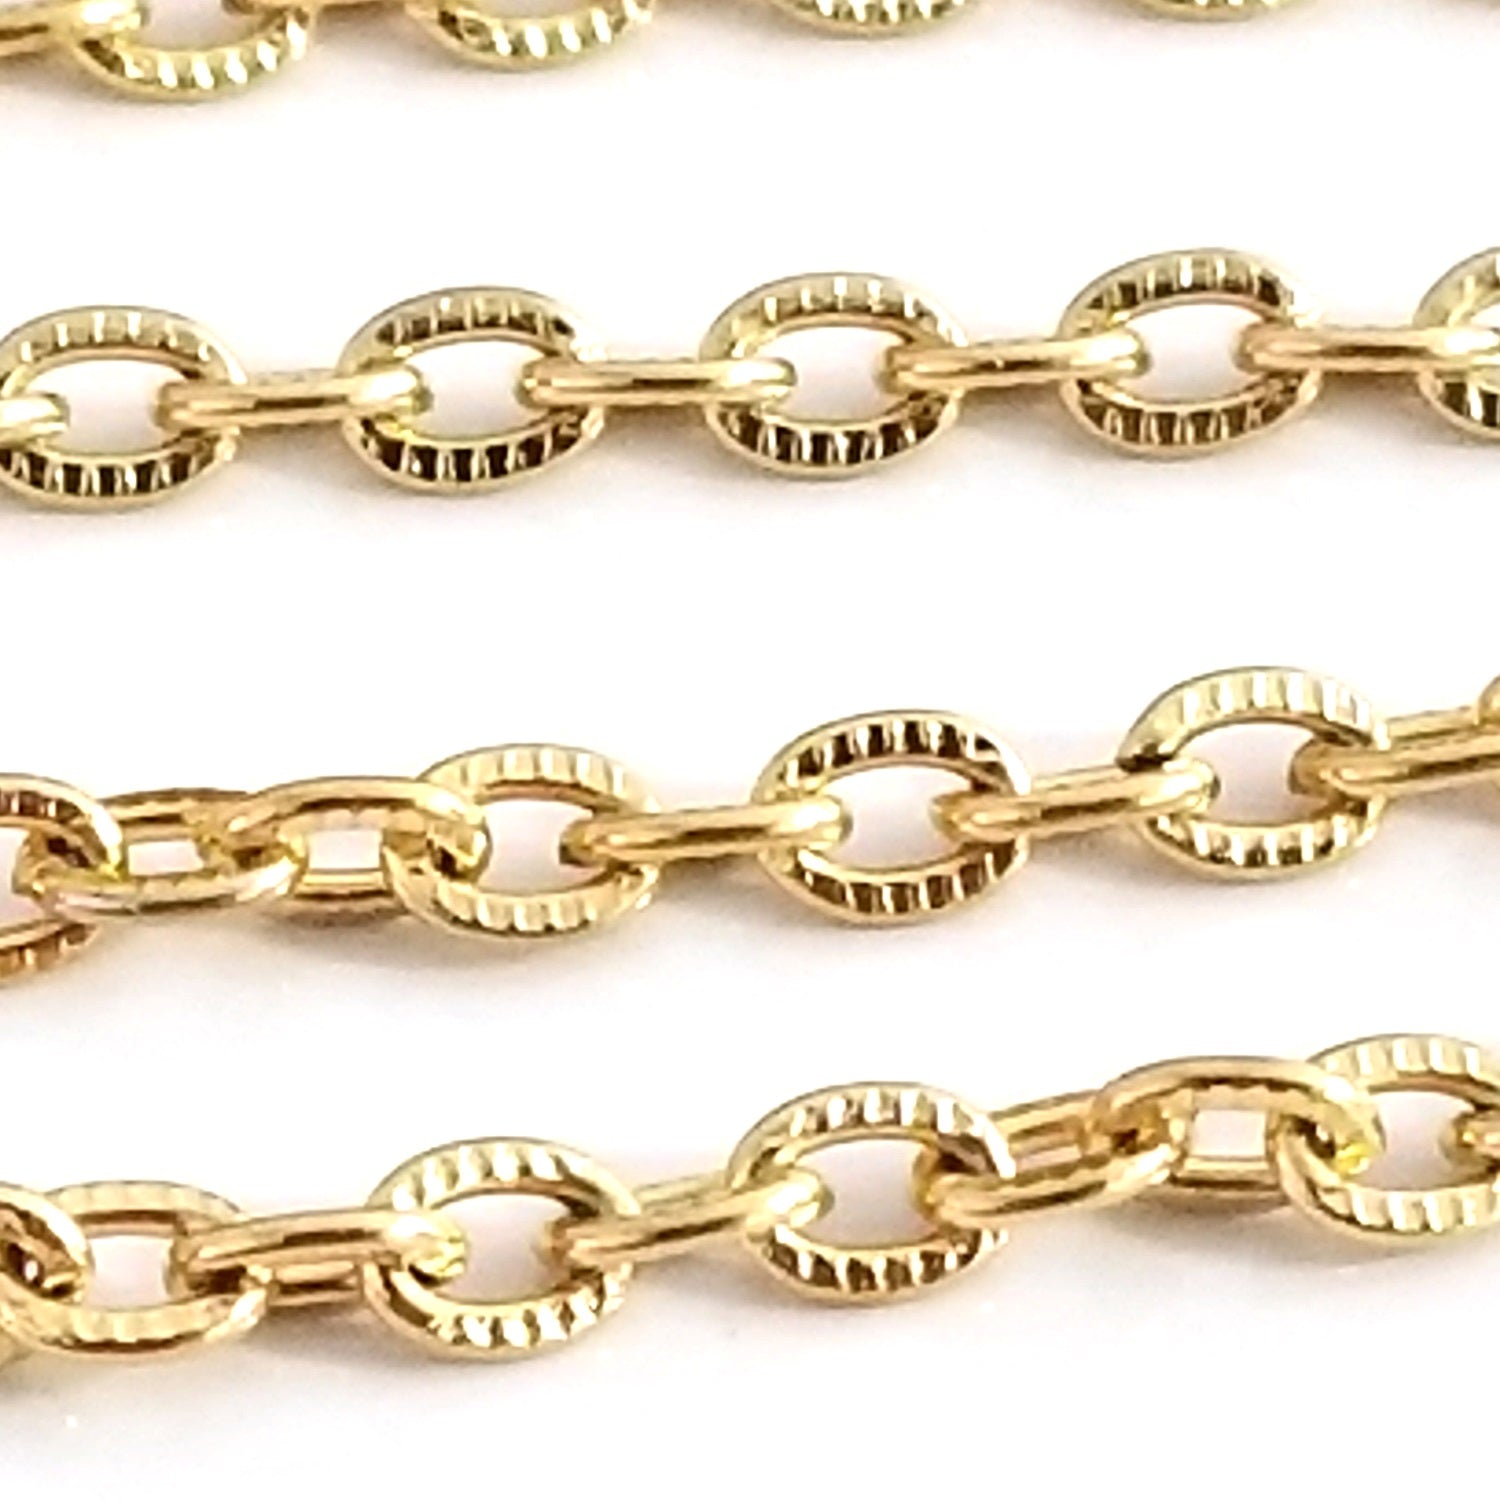 Gold Stainless Steel Jewelry Chain, 3x4mm Oval, Open Links, Lot